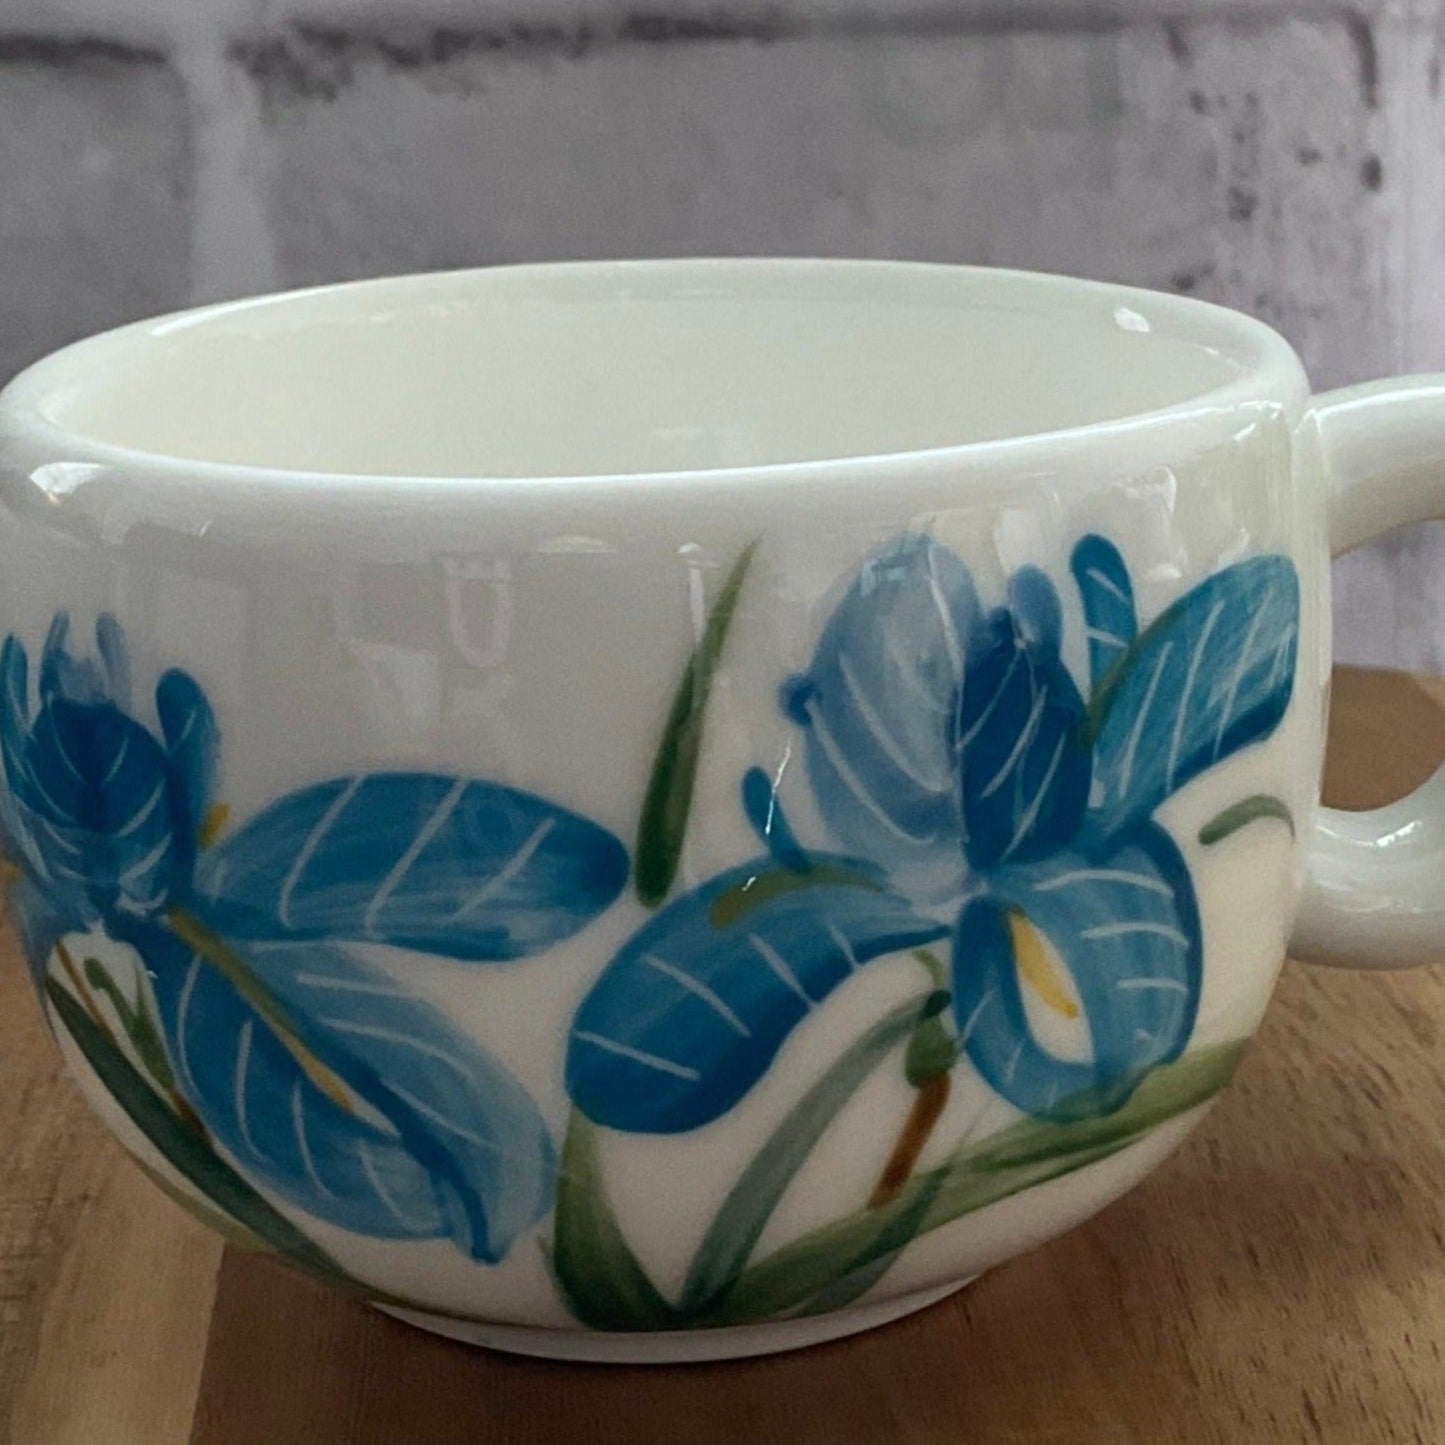 A Closer Look of the Iris Latte Cup, to Show the High Quality of this Porcelain Cup